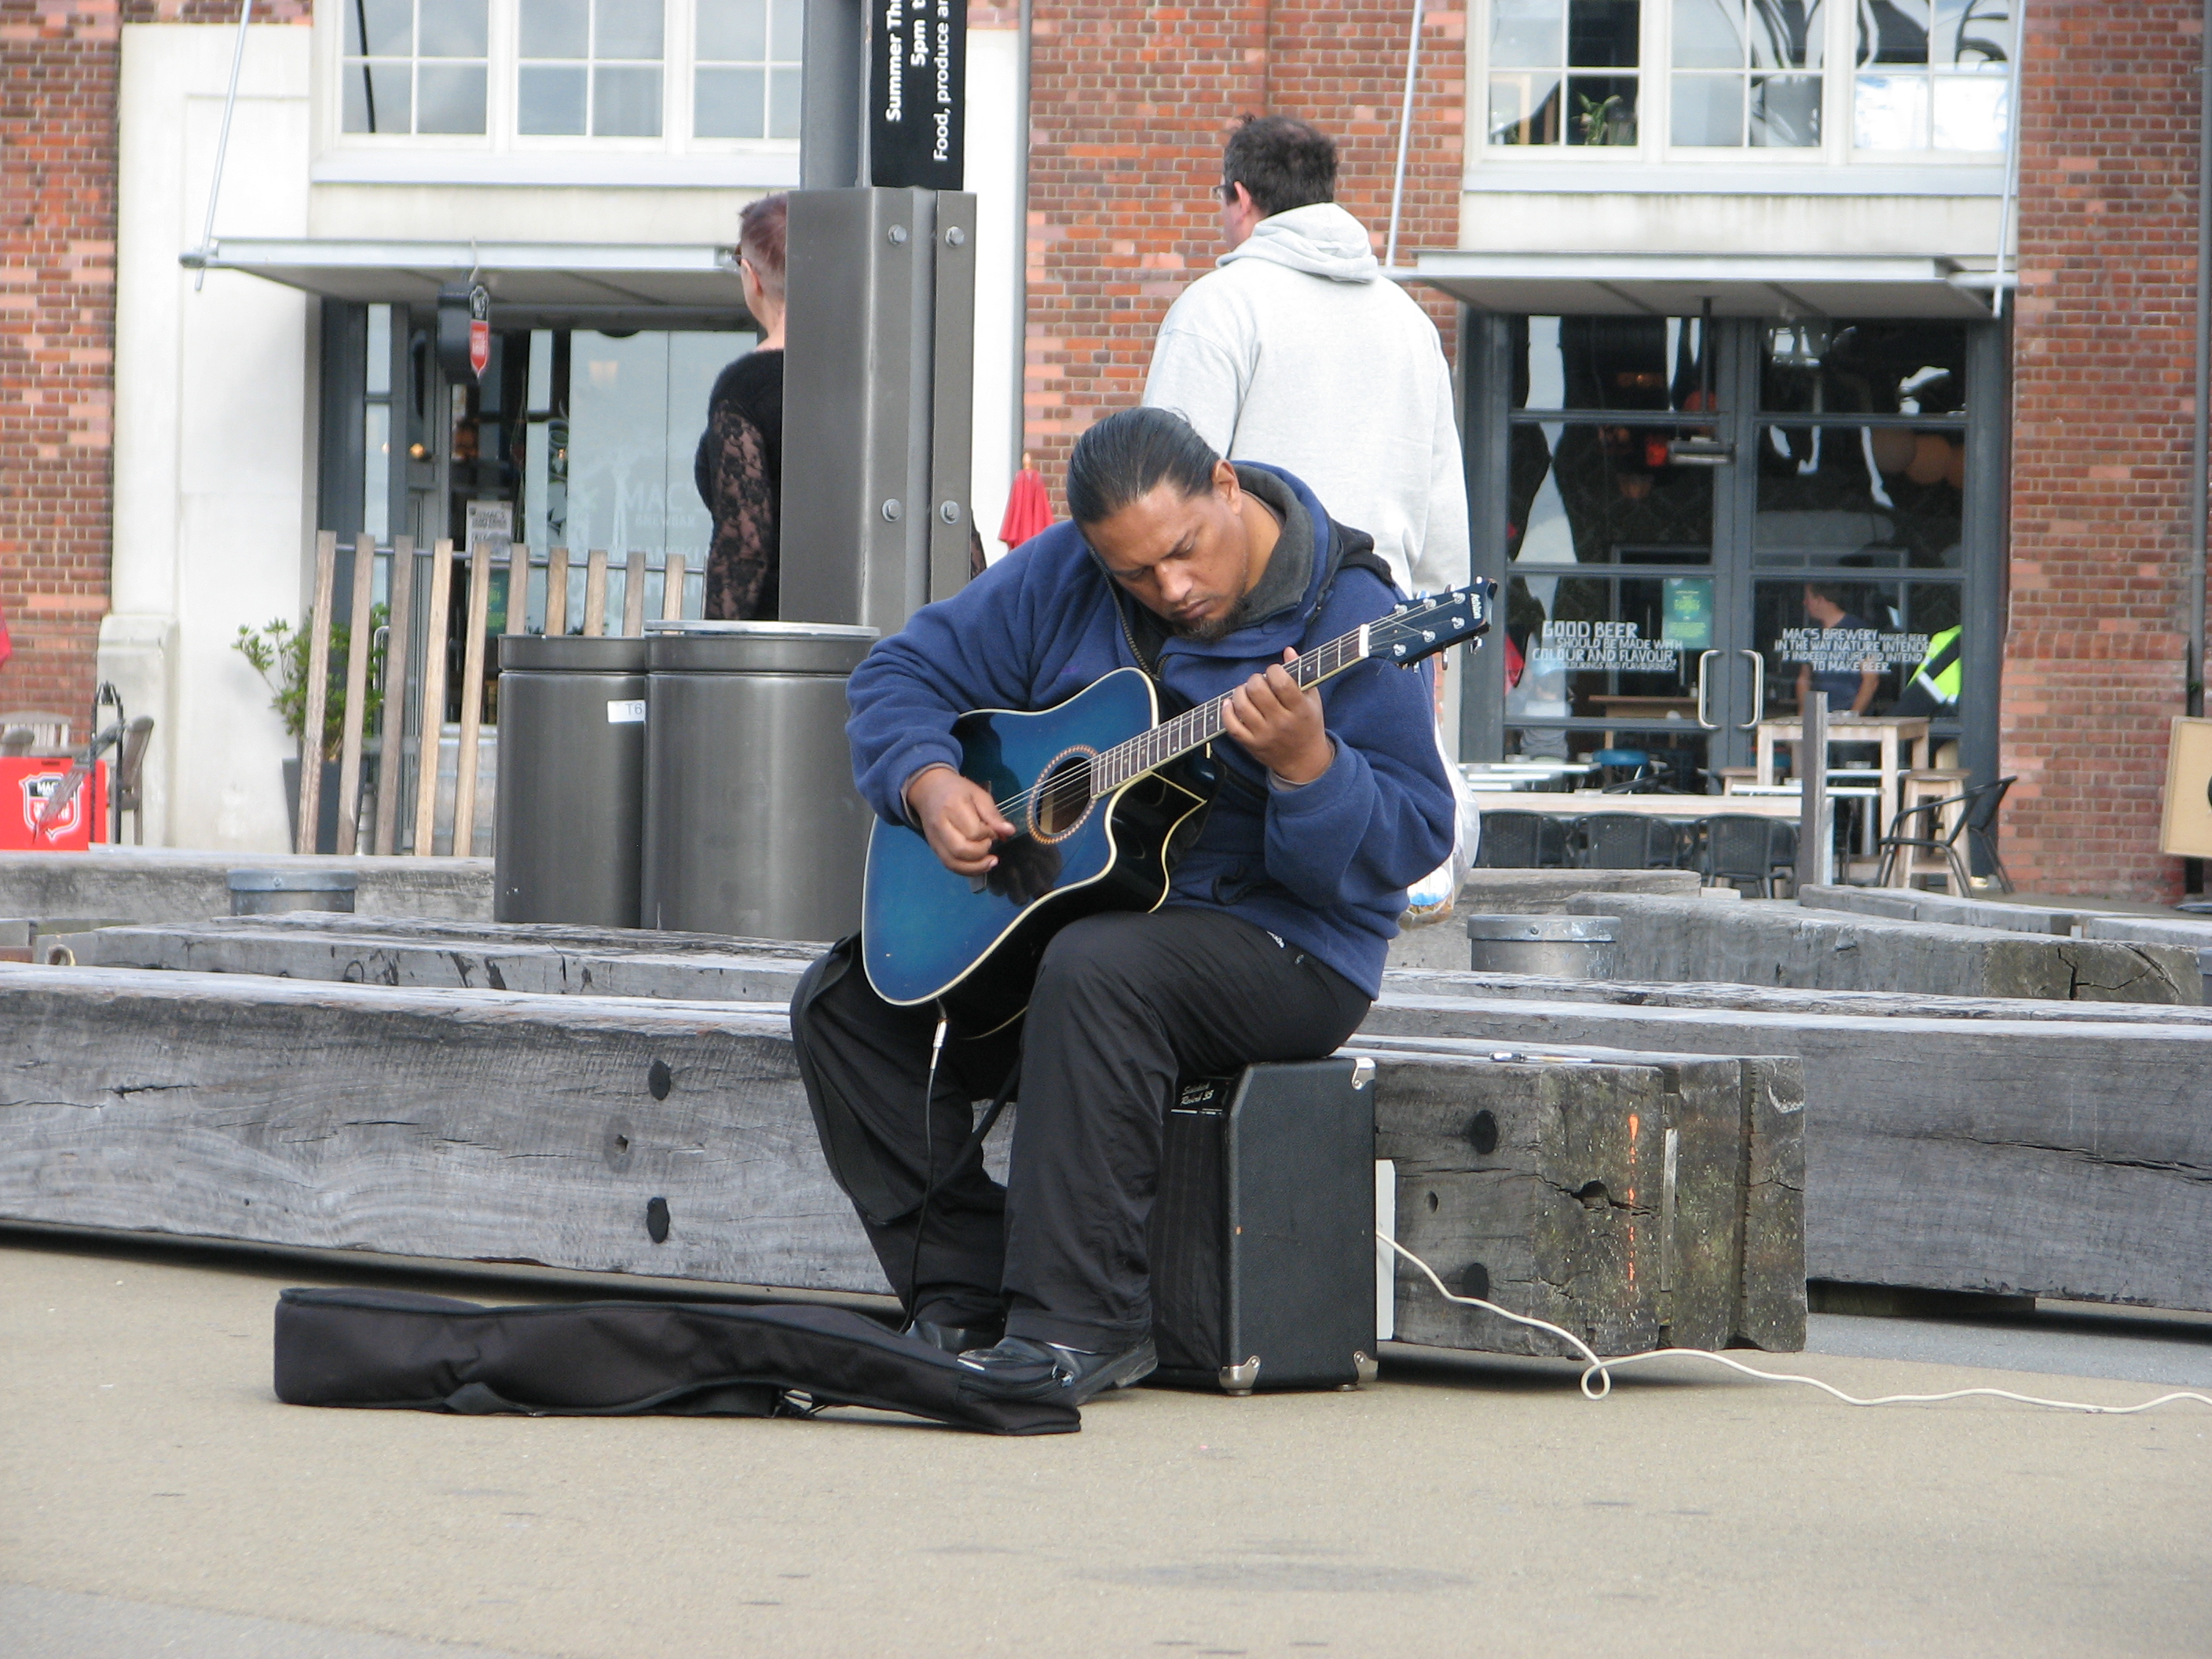 Busker plugged in